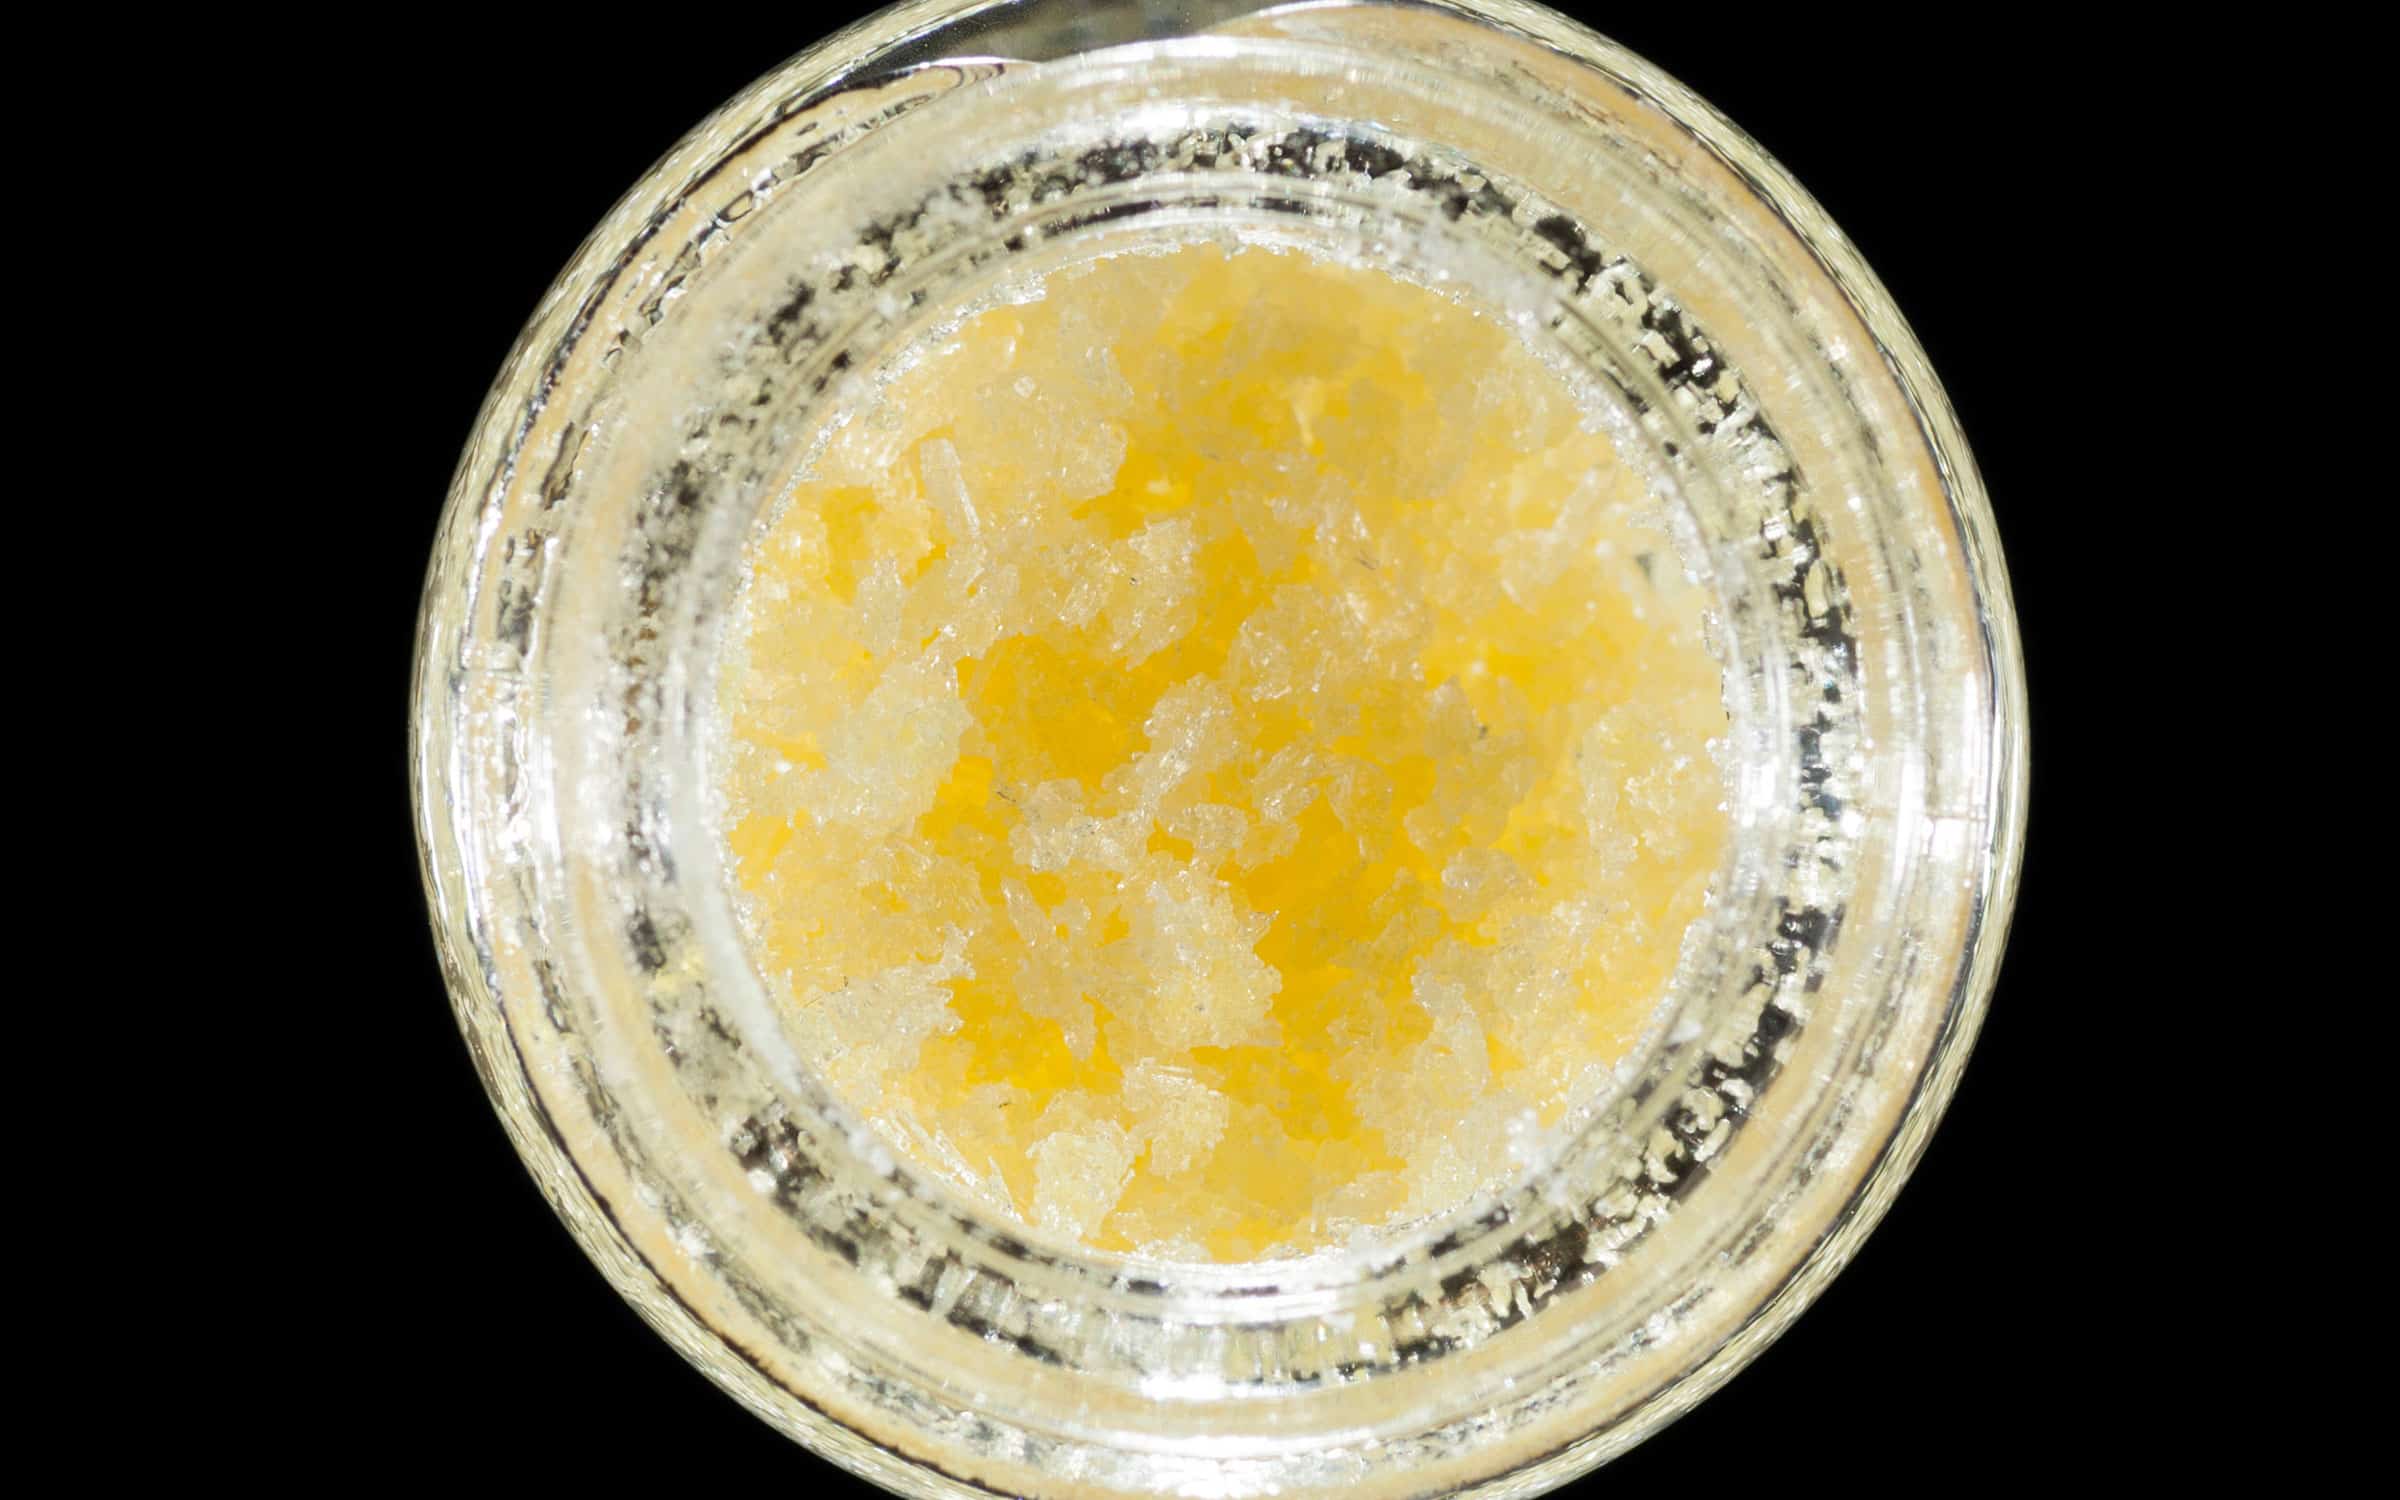 CBD EXTRACTS AND CONCENTRATES - Cbd|Concentrates|Products|Concentrate|Hemp|Shatter|Wax|Isolate|Product|Thc|Terpenes|Oil|Effects|Cannabis|Cannabinoids|Spectrum|Plant|Form|Way|Pure|Extract|Powder|Crystals|Dab|Process|Extraction|Flower|People|Benefits|Vape|Body|Experience|Resin|Quality|Waxes|Health|Time|Potency|Amount|Forms|Cbd Concentrates|Cbd Concentrate|Cbd Wax|Cbd Shatter|Cbd Products|Cbd Isolate|Dab Rig|Cannabis Plant|Live Resin|Hemp Plant|Cbd Waxes|Free Shipping|Cbd Oil|Cbd Crystals|Tweedle Farms|Cbd Dabs|Full Spectrum Cbd|Dab Pen|Extraction Process|Daily Basis|Cbd Isolates|Entourage Effect|Scientific Hemp Oil®|Blue Moon Hemp|Cbd Oil Solutions|Pure Cbd Isolate|Pure Cbd|Small Amount|United States|Cbd Flower